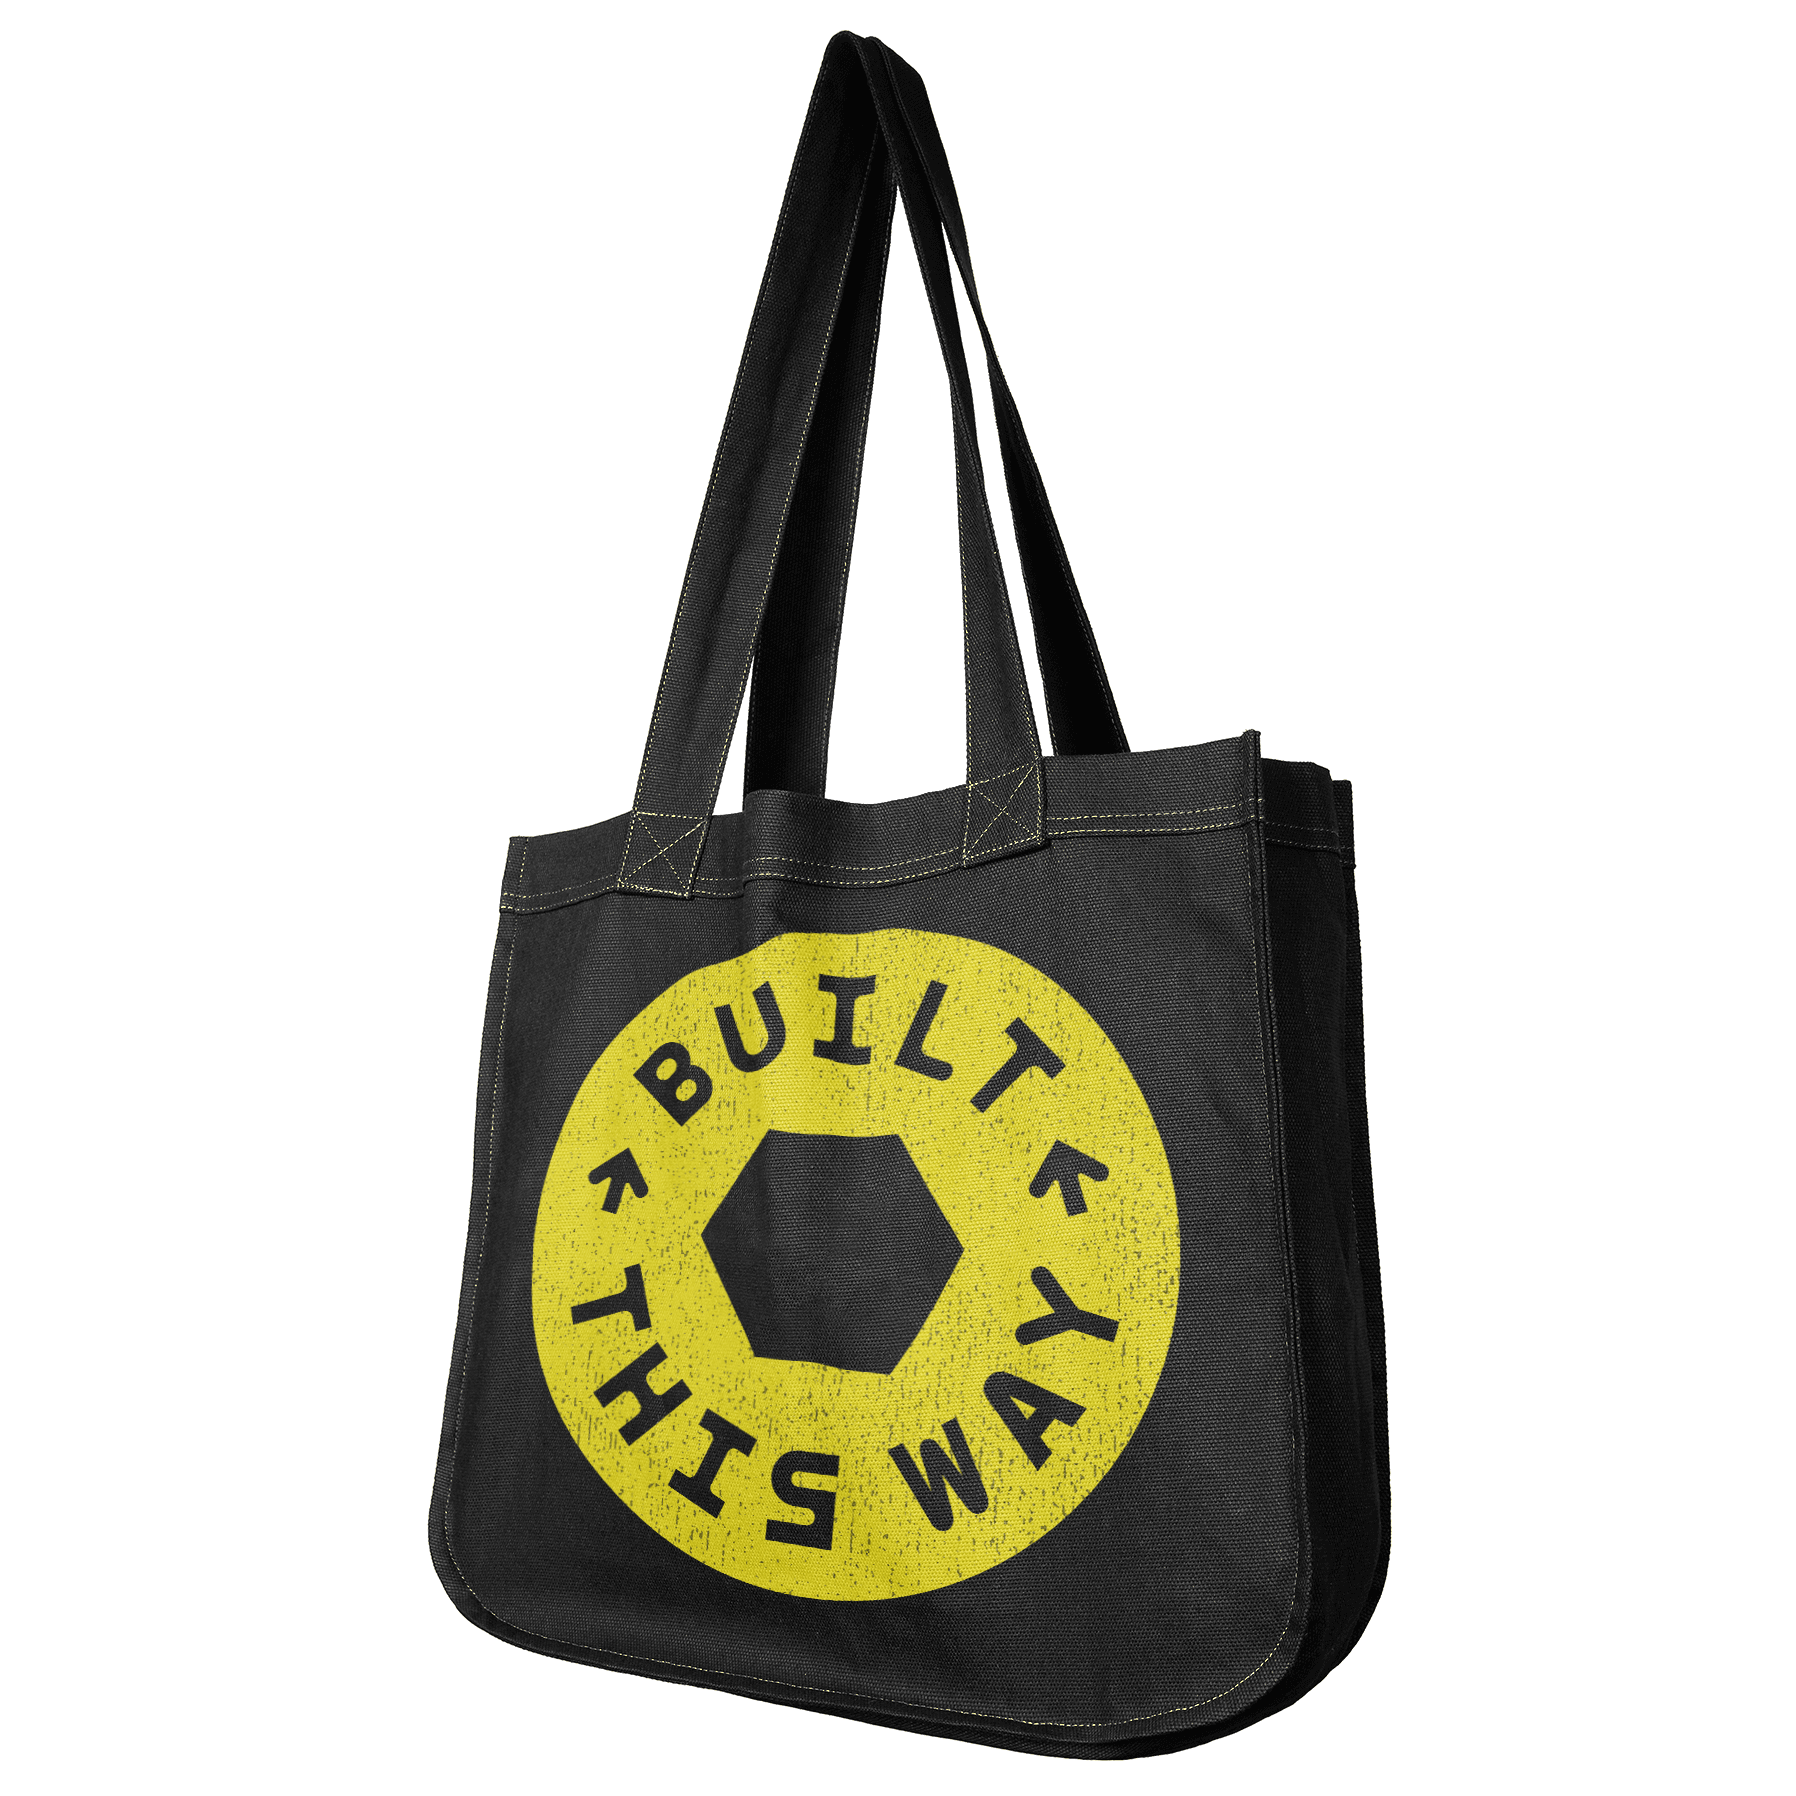 Black tote bag with yellow Screen Printed Logo that reads Built this Way